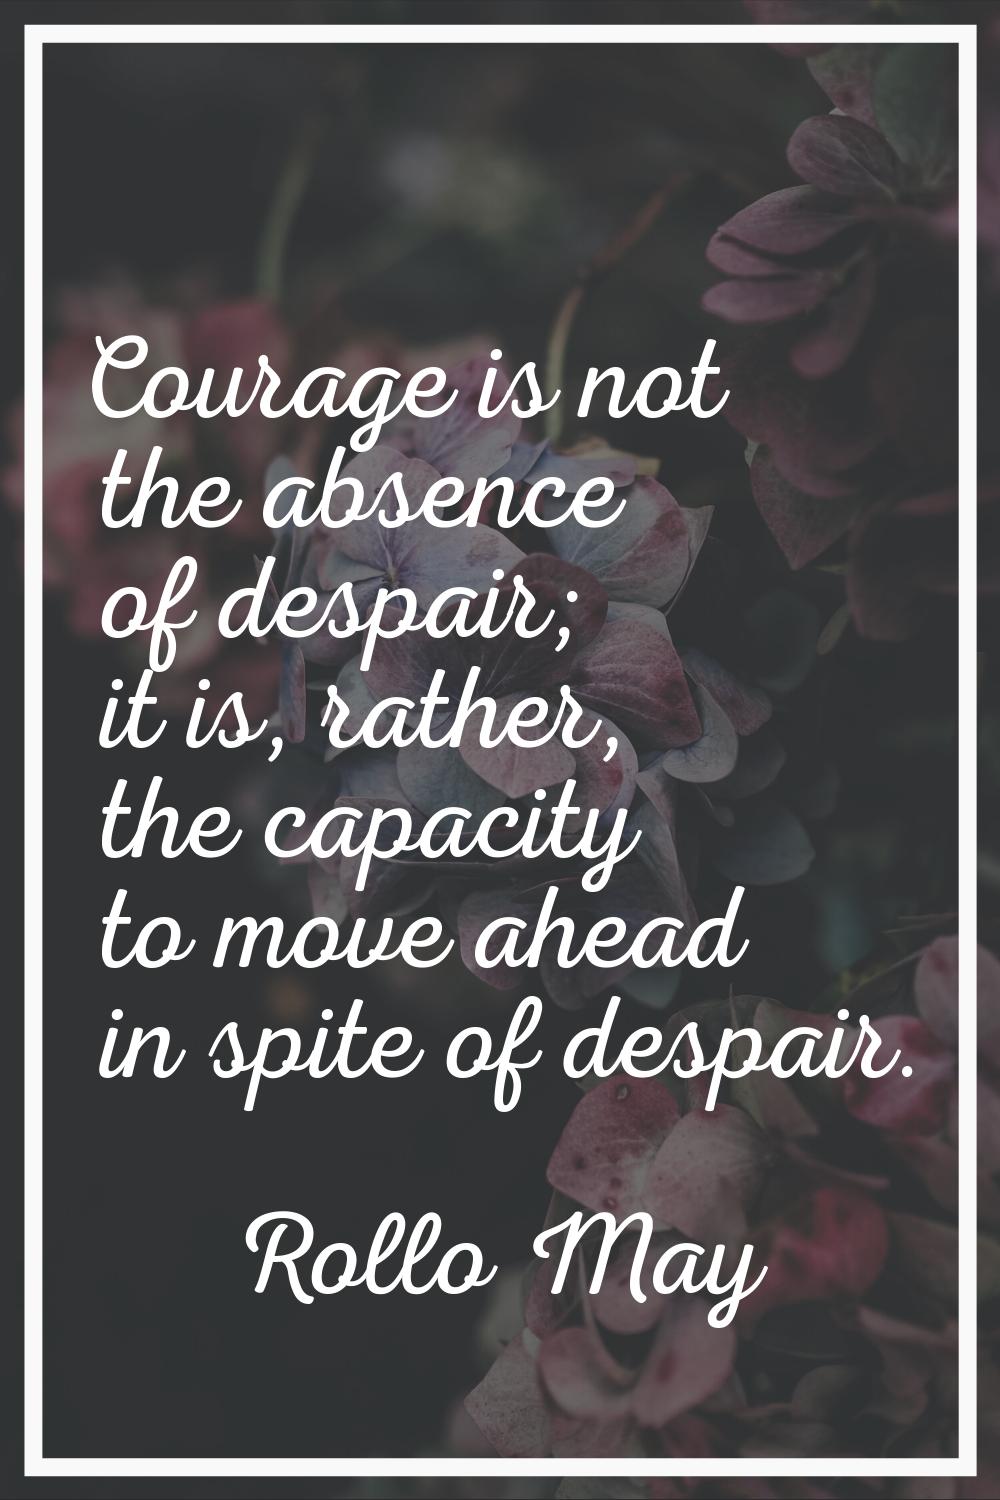 Courage is not the absence of despair; it is, rather, the capacity to move ahead in spite of despai